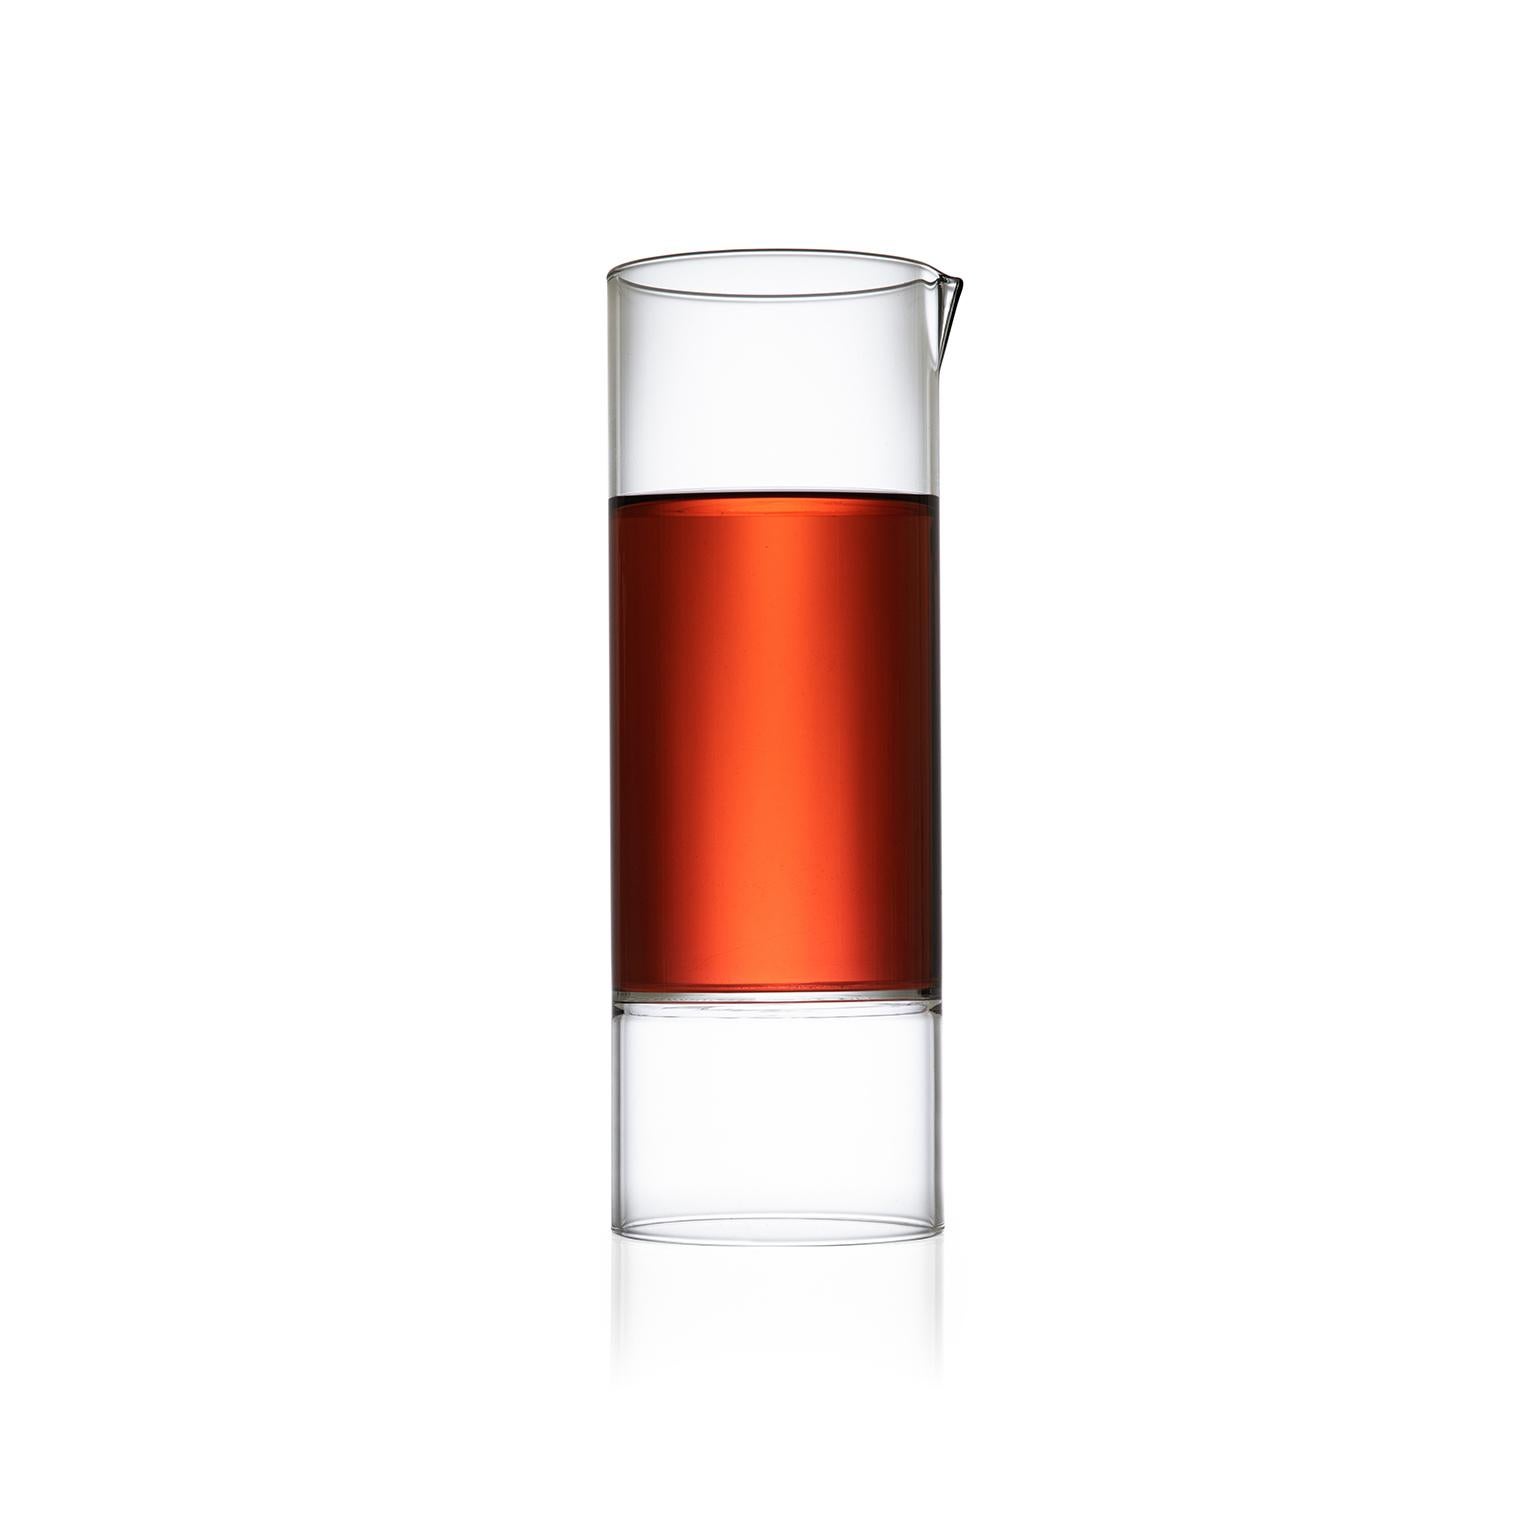 Strikingly simple in form, the contemporary minimal Revolution collection is handcrafted in the Czech Republic by master glassblowers, and formed from a pure extrusion of hand blown borosilicate glass. The Revolution collection is in the Art